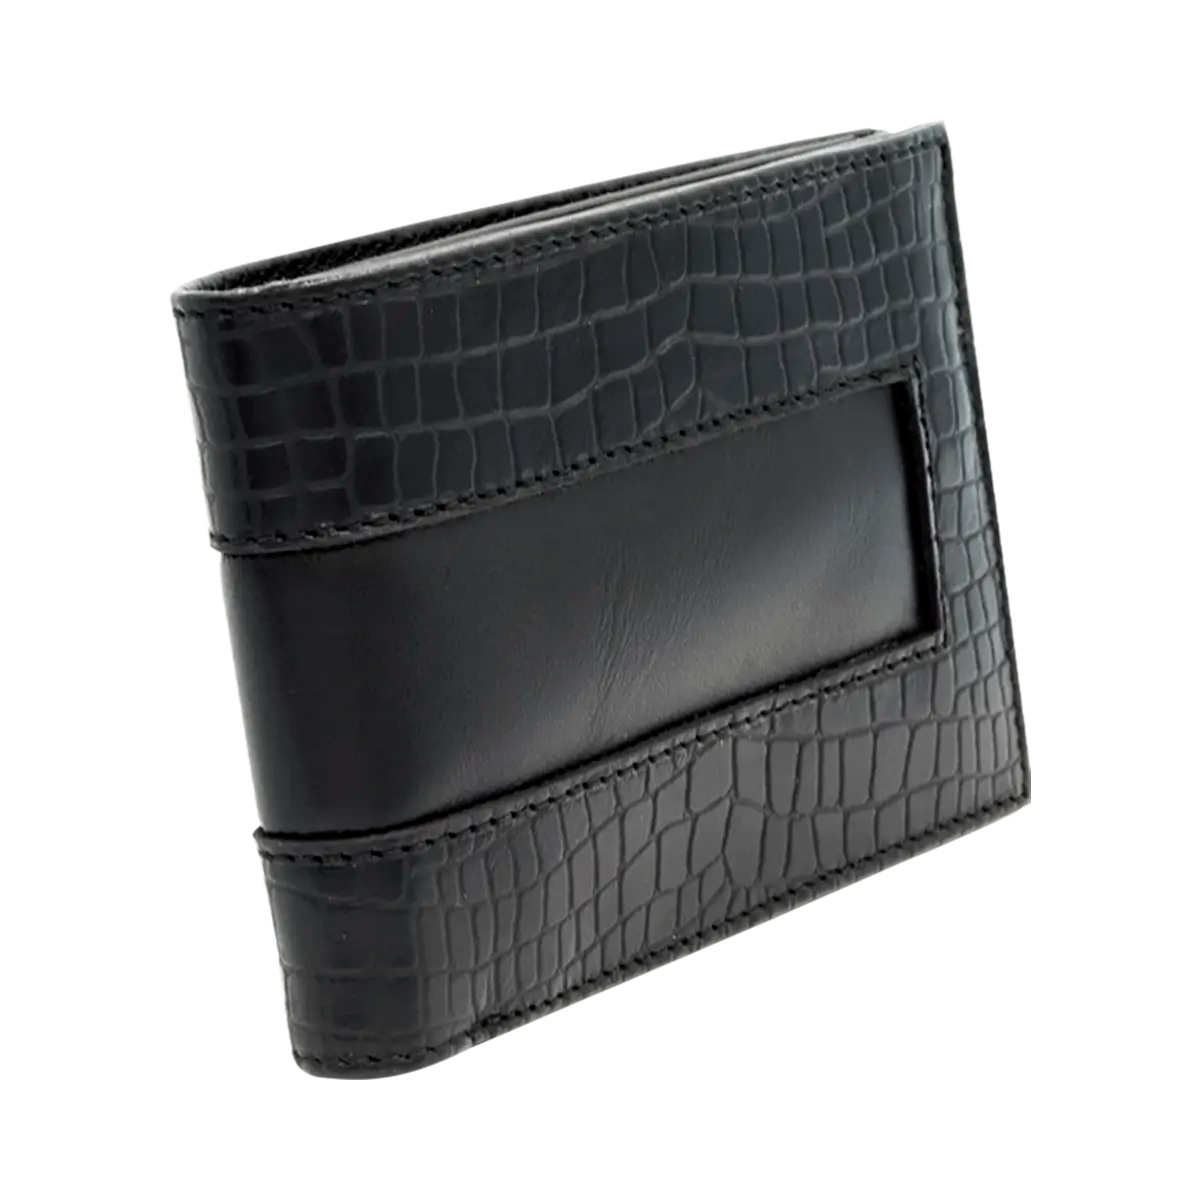 black print leather wallet for men &amp; women. Fashion accessories, shop in San Diego, CA.